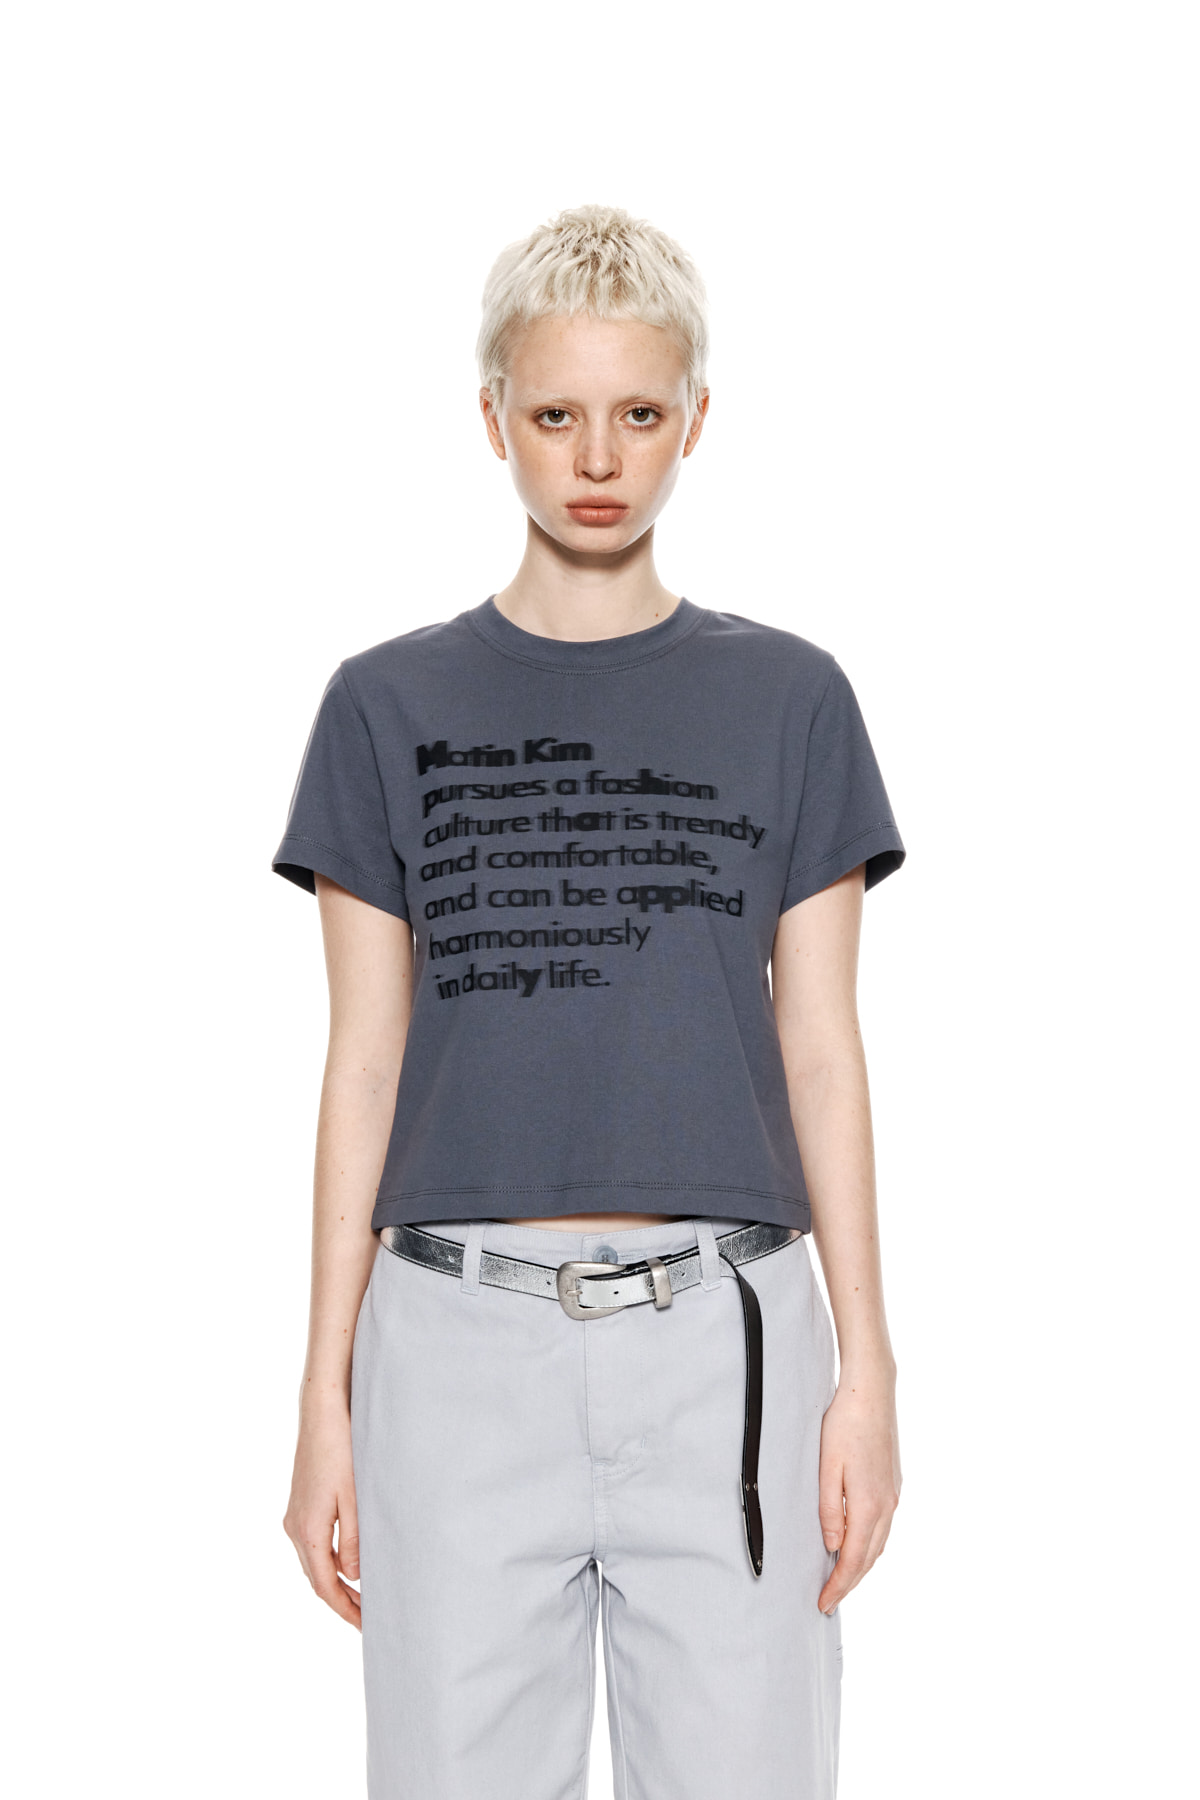 BOLD TYPO CROP TOP IN CHARCOAL